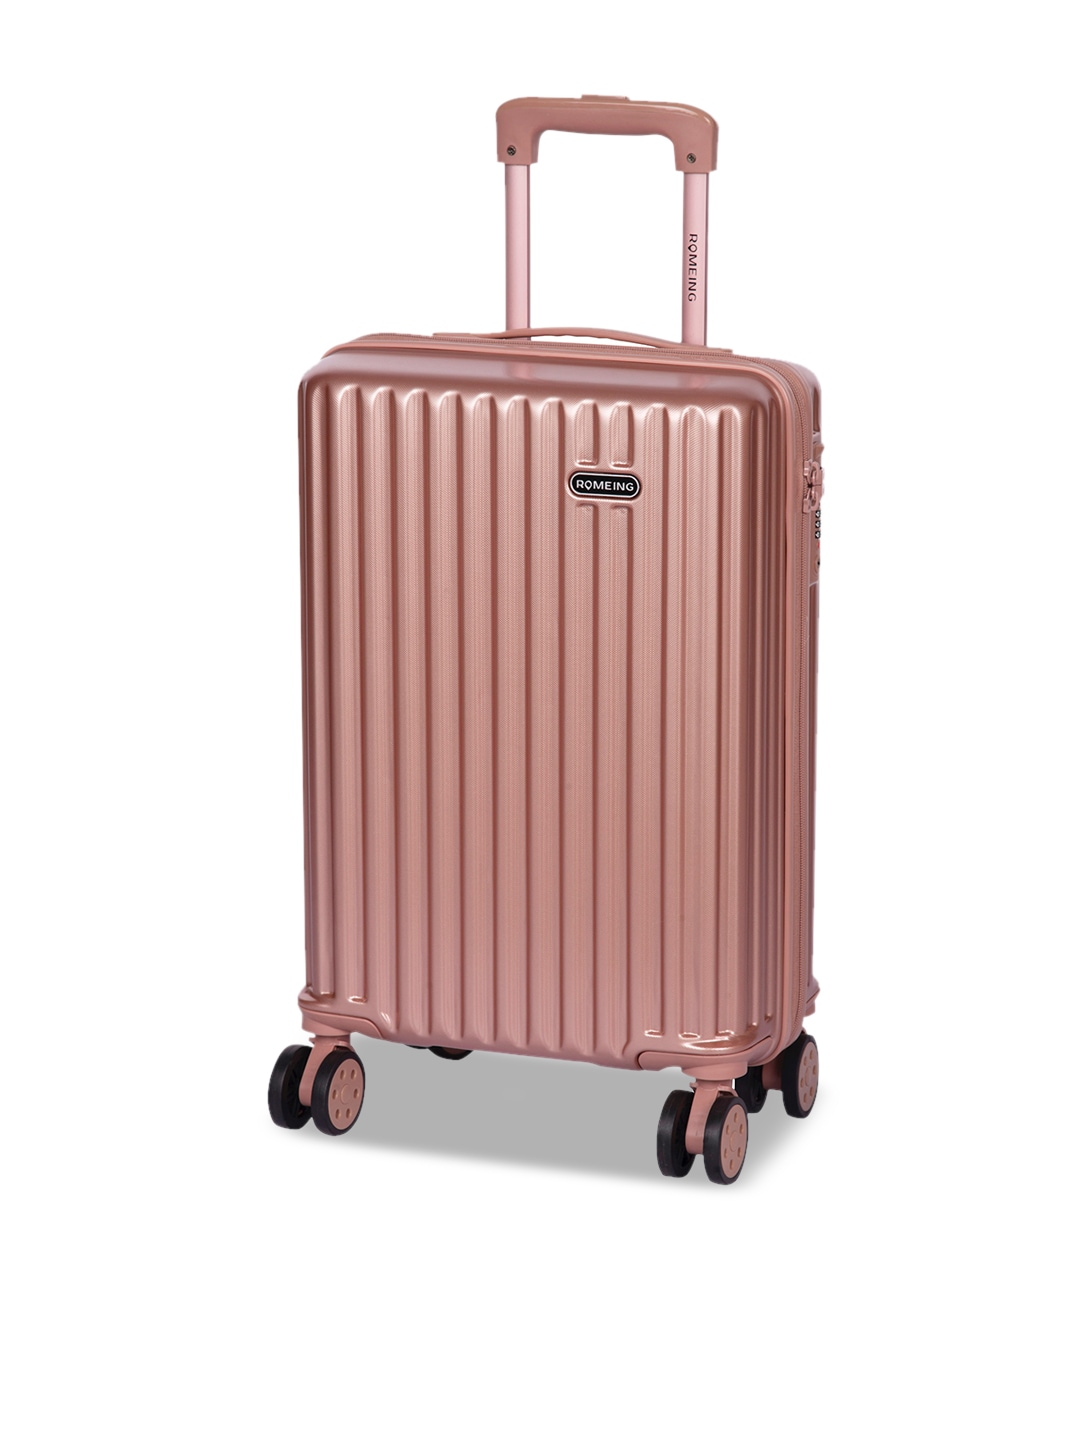 ROMEING Genoa Rose Gold-Toned Polycarbonate Hard Sided Cabin Trolley Suitcase Price in India